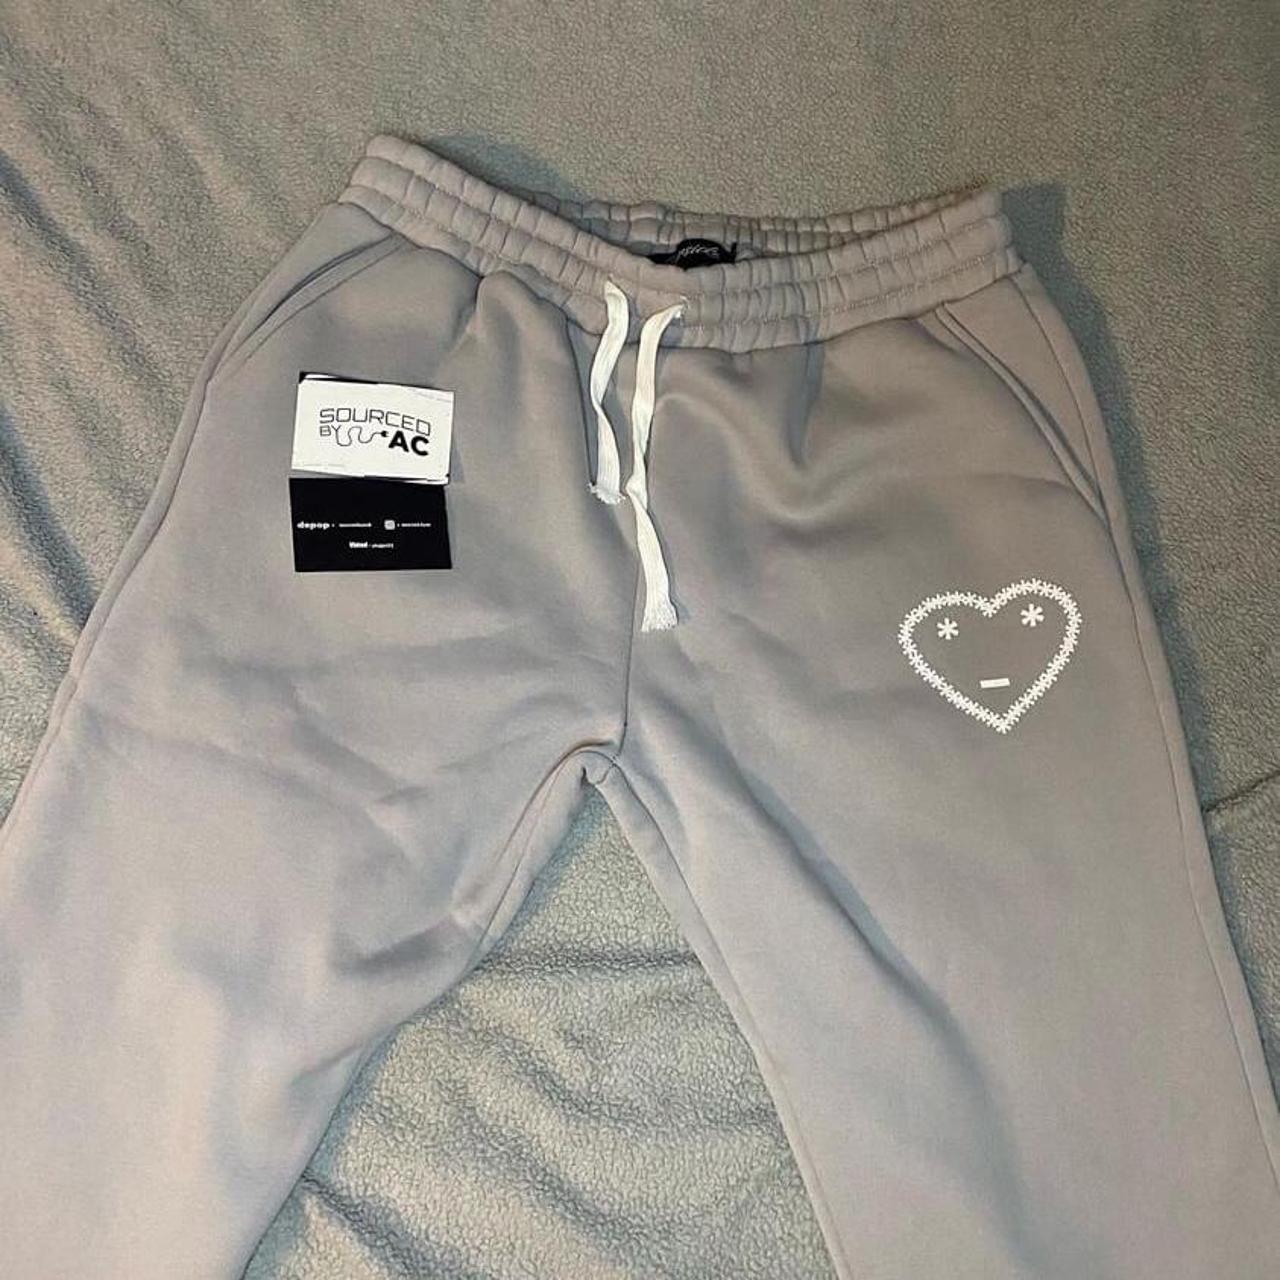 Carsicko Tracksuit in Grey - Size - XL - 10/10... - Depop